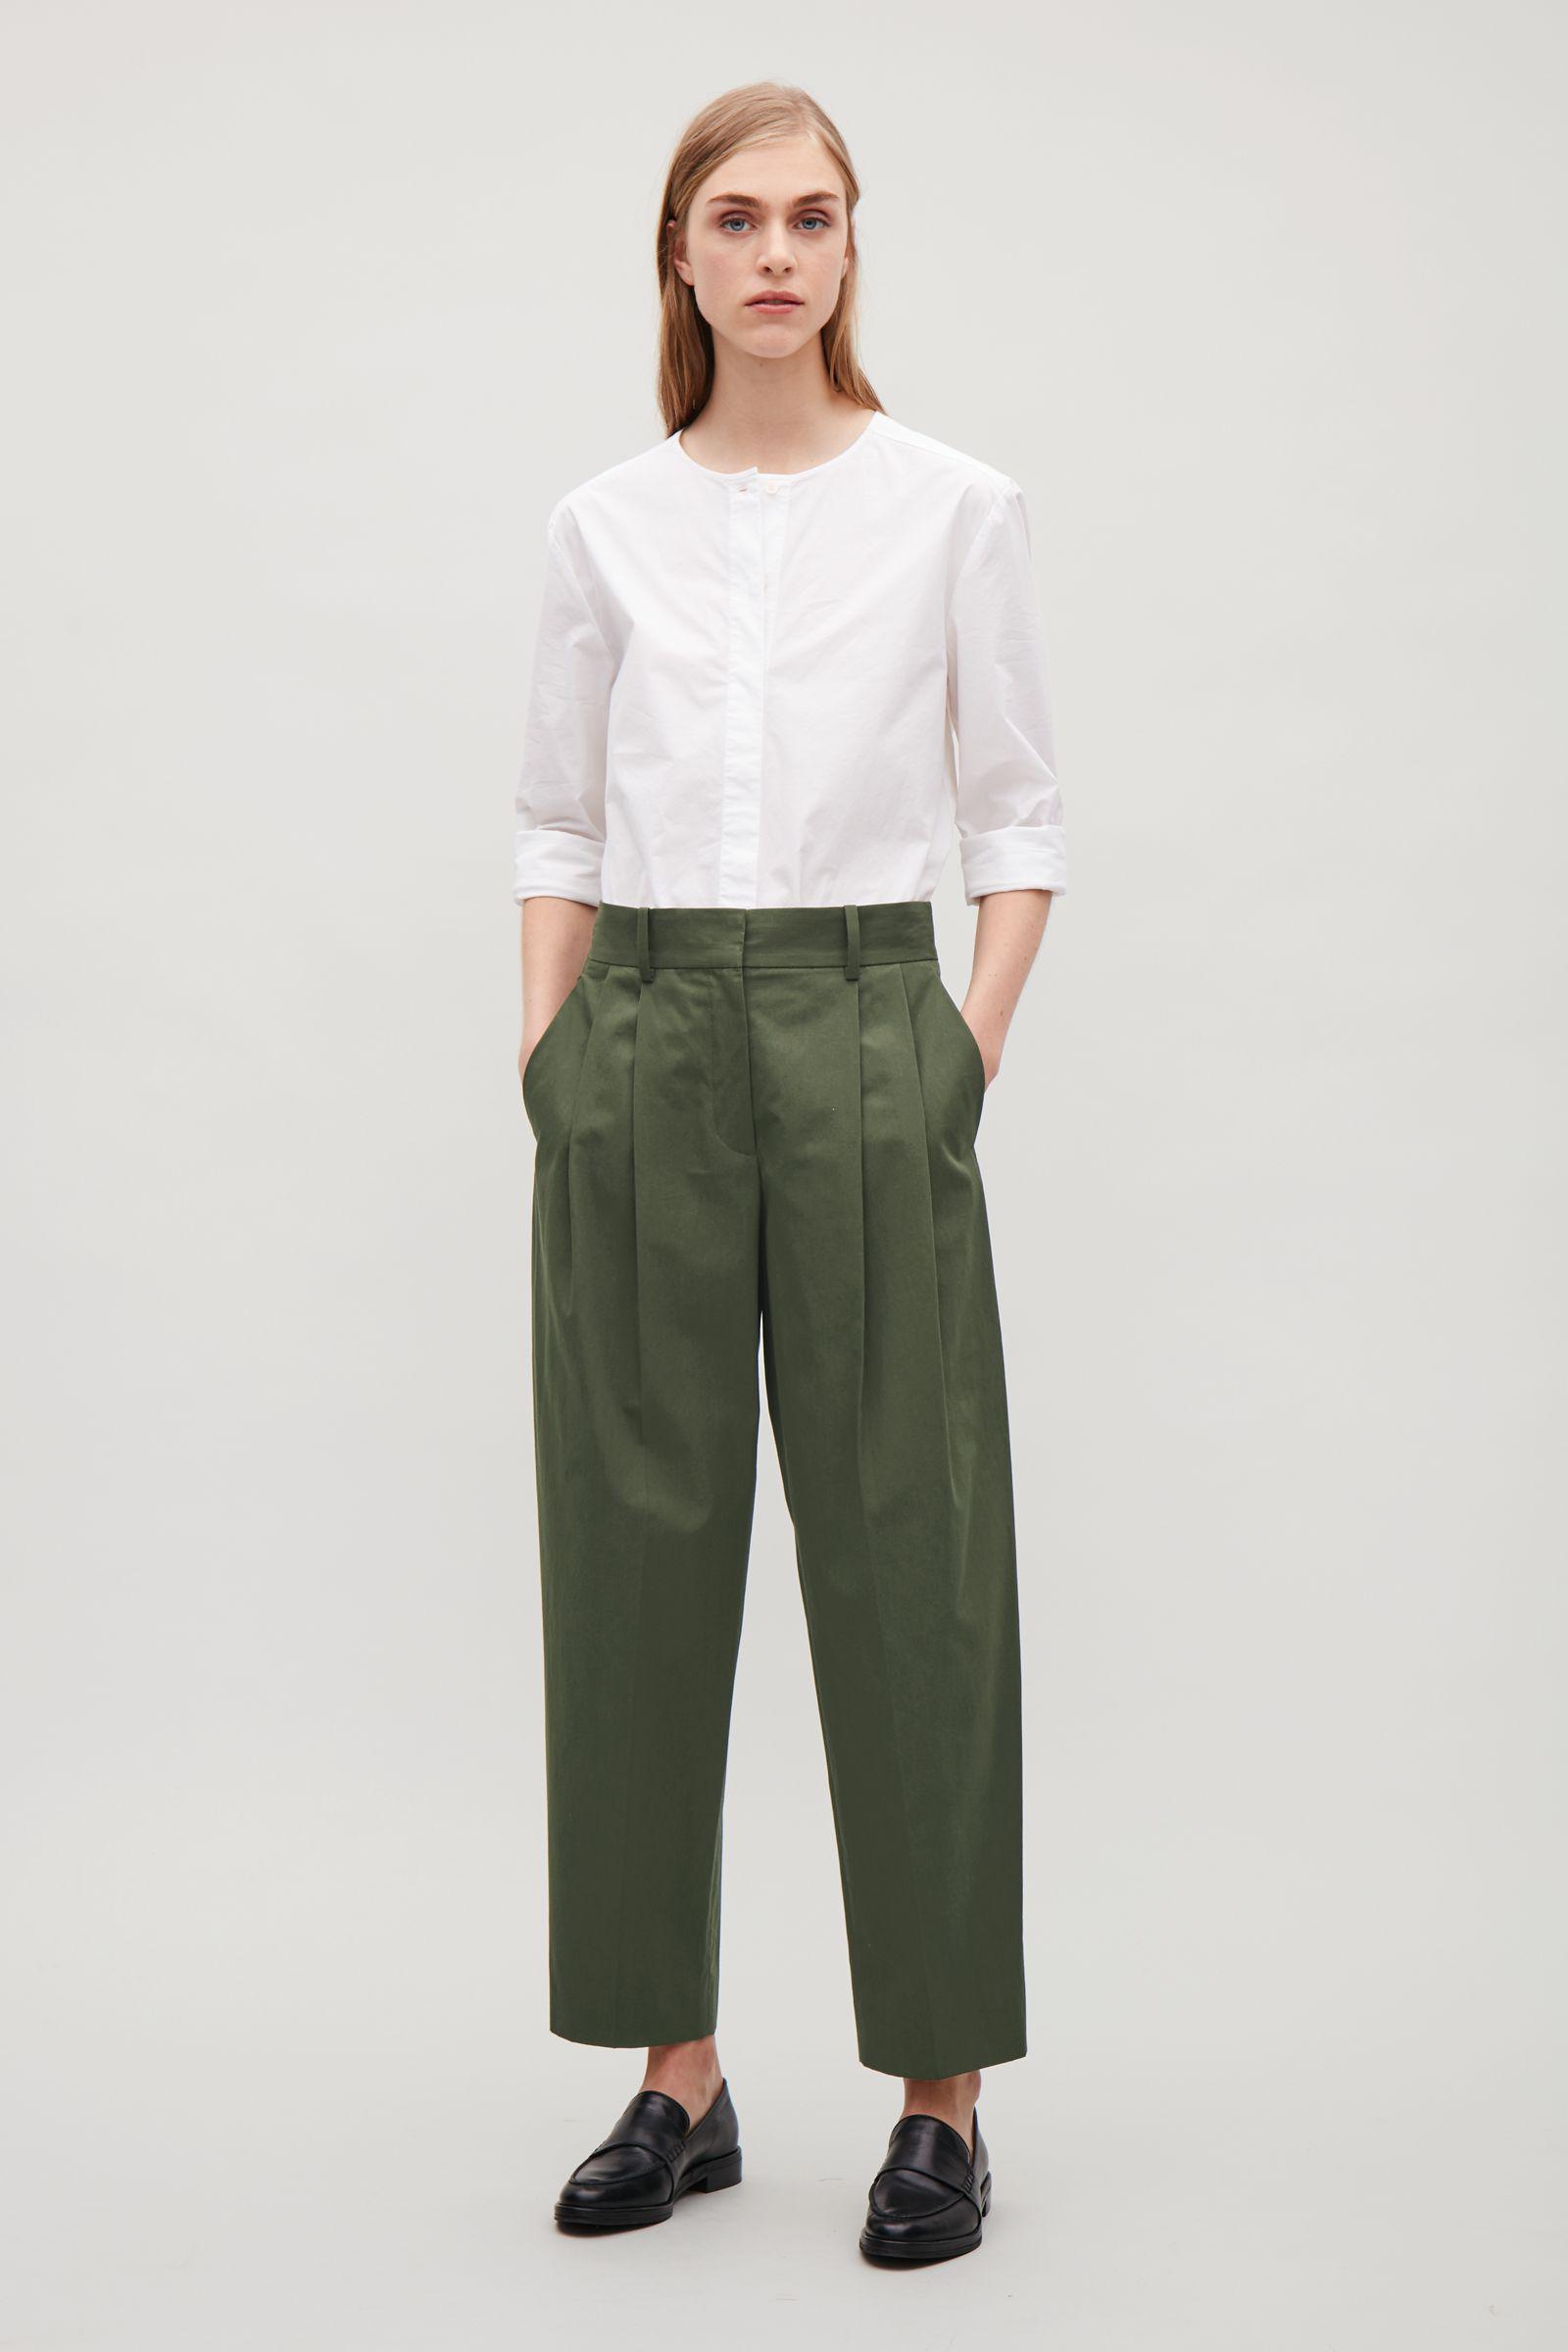 COS Dense Cotton Trousers in Green